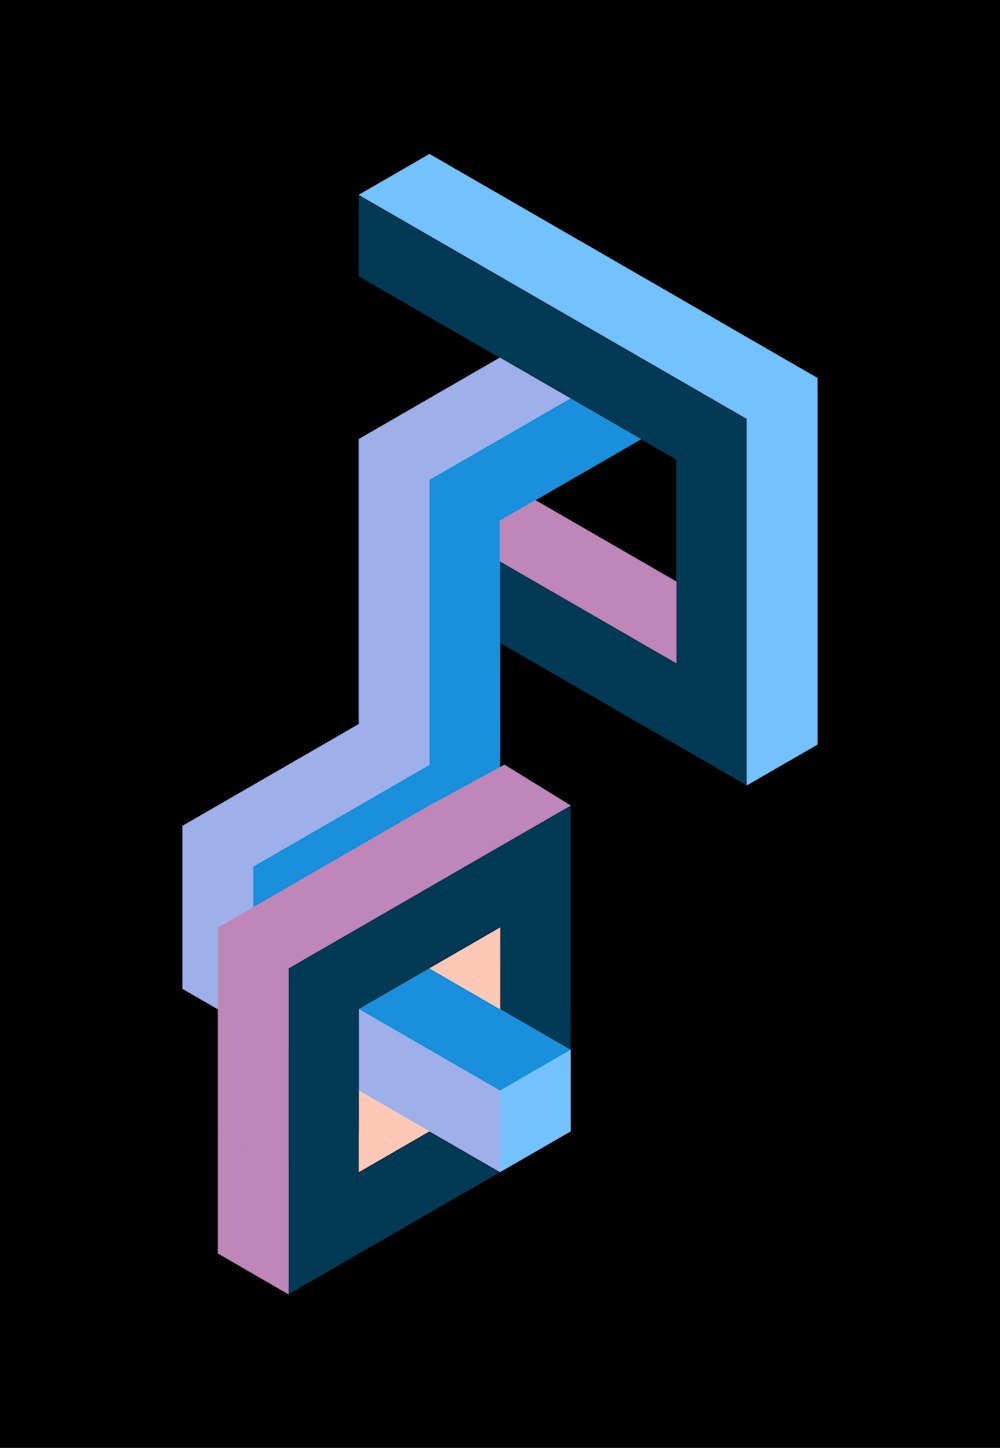 a stylized logo of a letter p in blue, pink, and purple